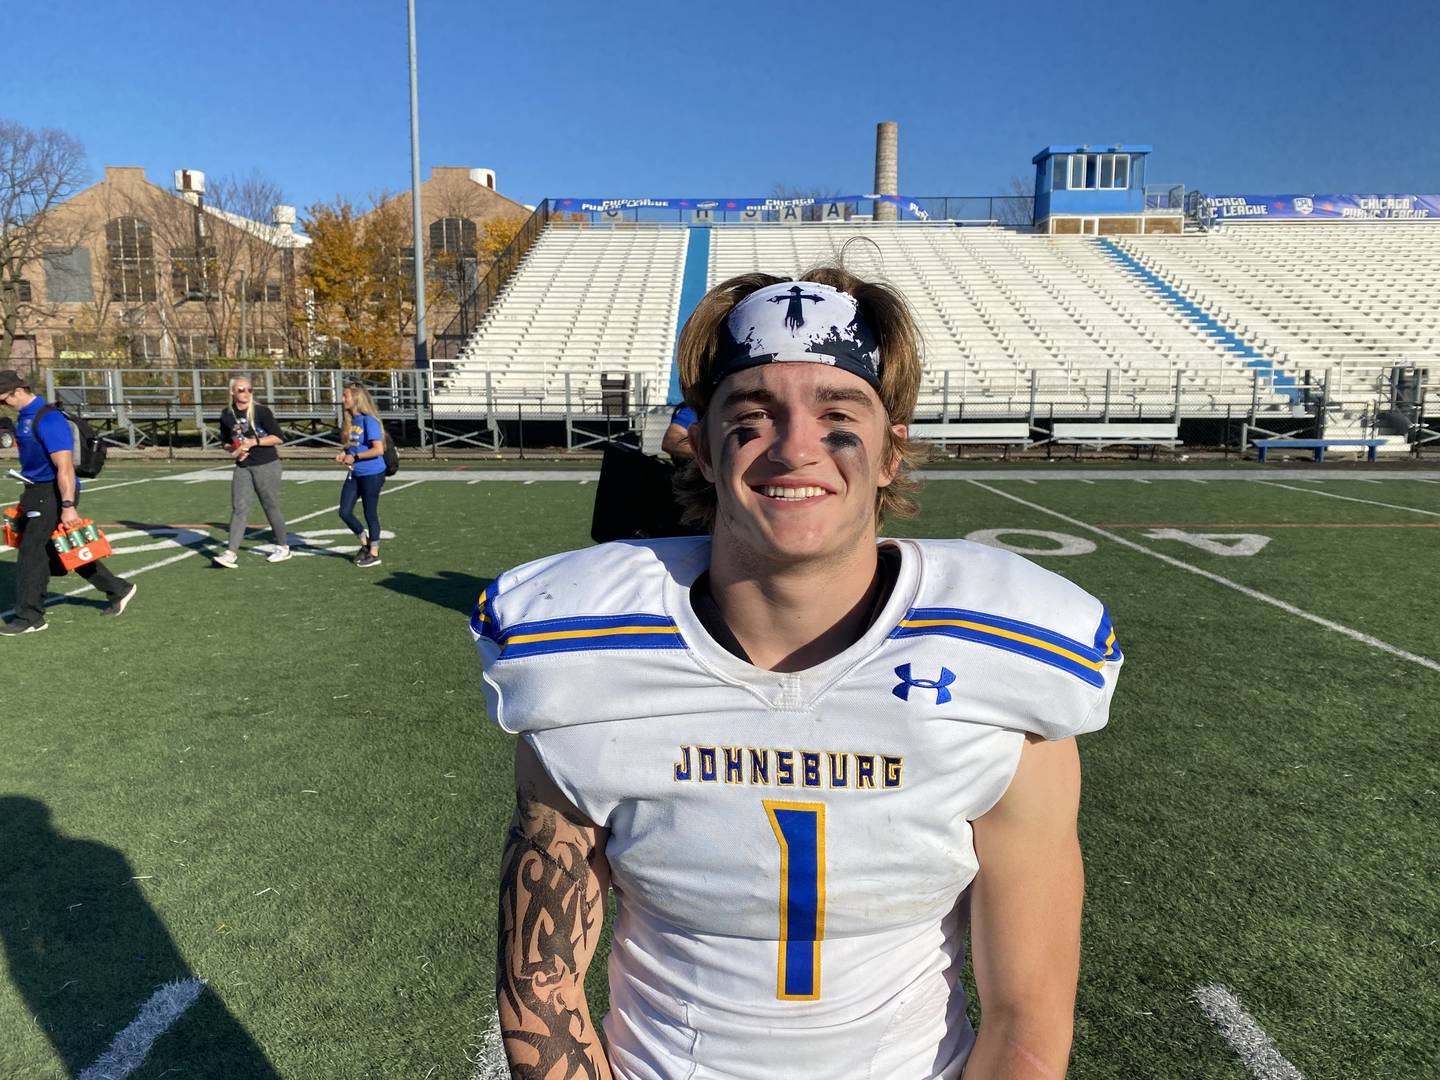 Johnsburg's Jake Metze scored four total touchdowns on Saturday to help the Skyhawks win their Class 4A opener against Hyde Park, 54-8, in Chicago.